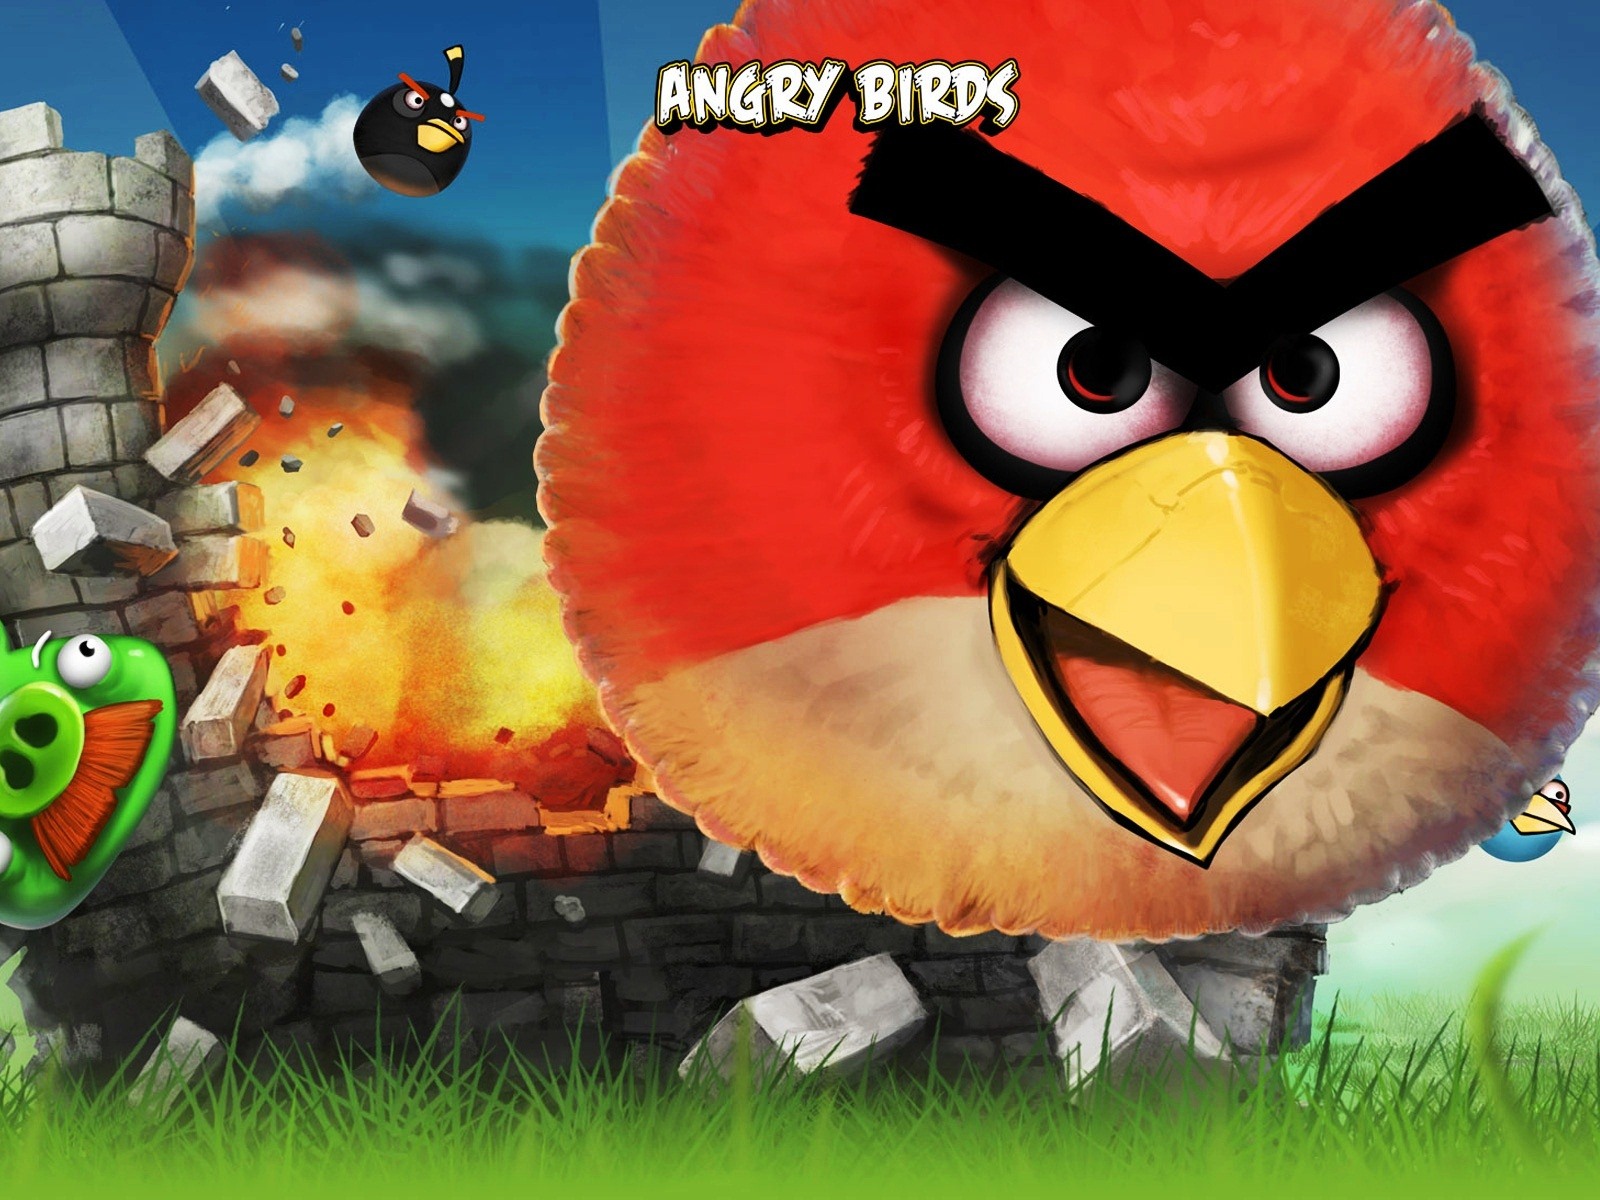 Angry Birds Game Wallpapers #7 - 1600x1200